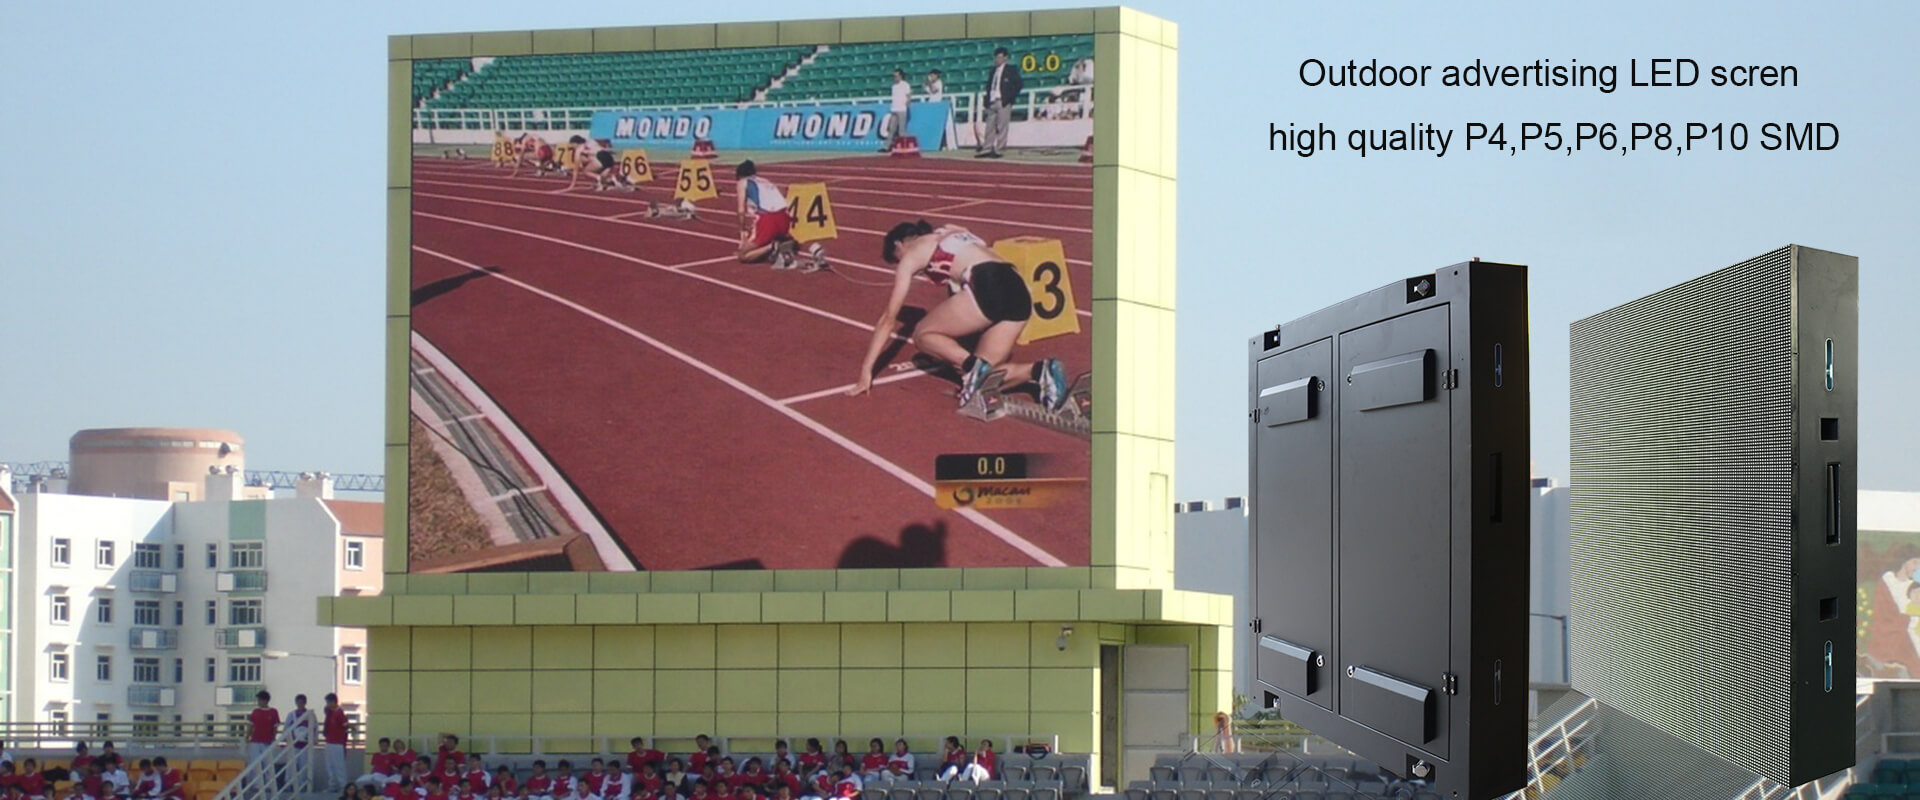 Outdoor advertising led display